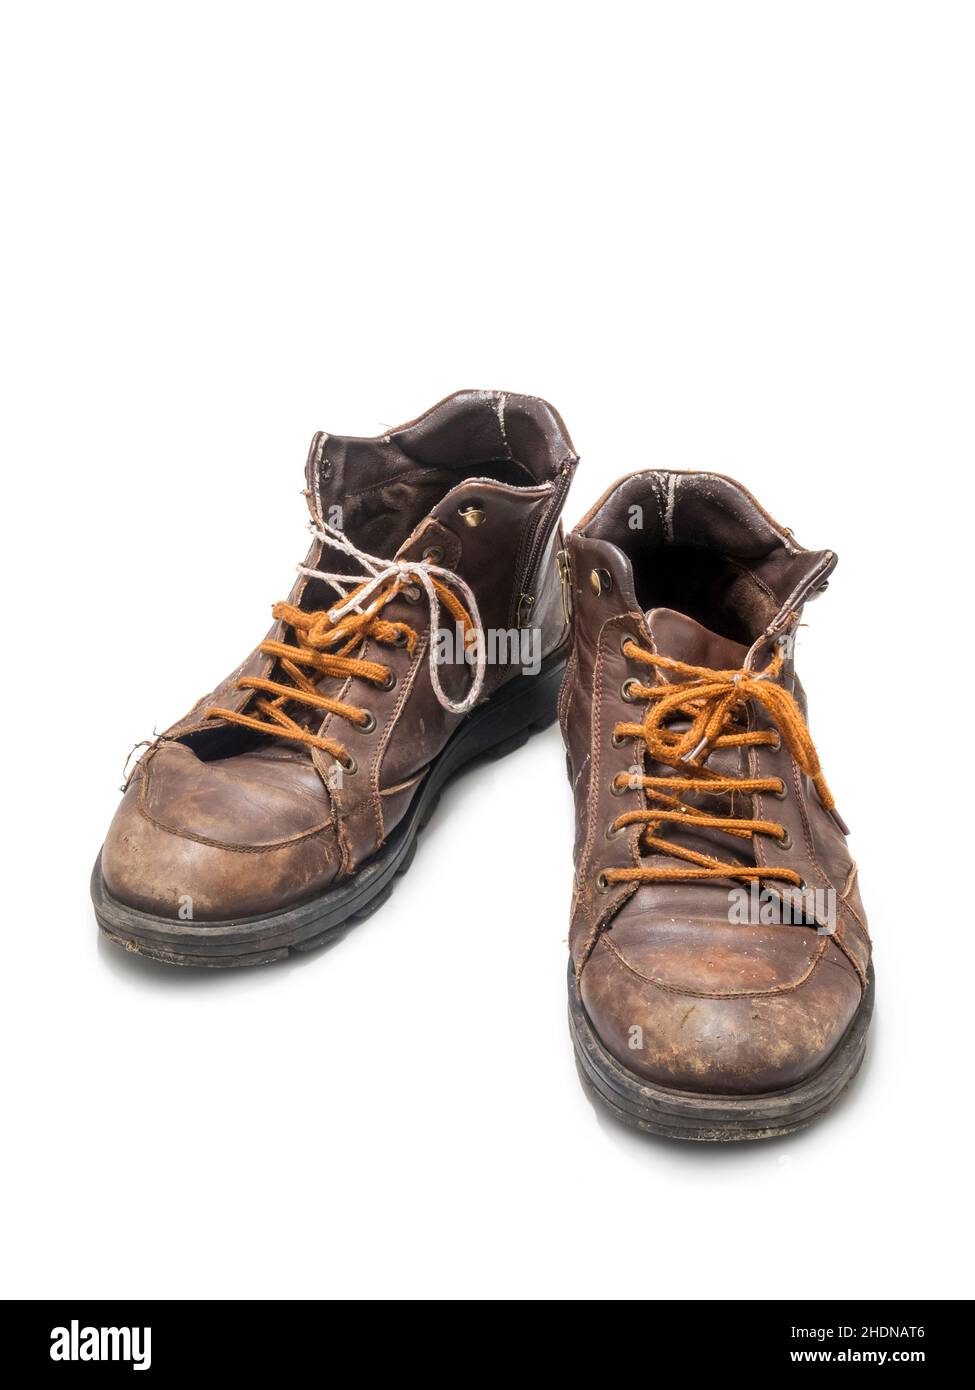 hiking boot, worn out, boot, boots, hiking boots Stock Photo